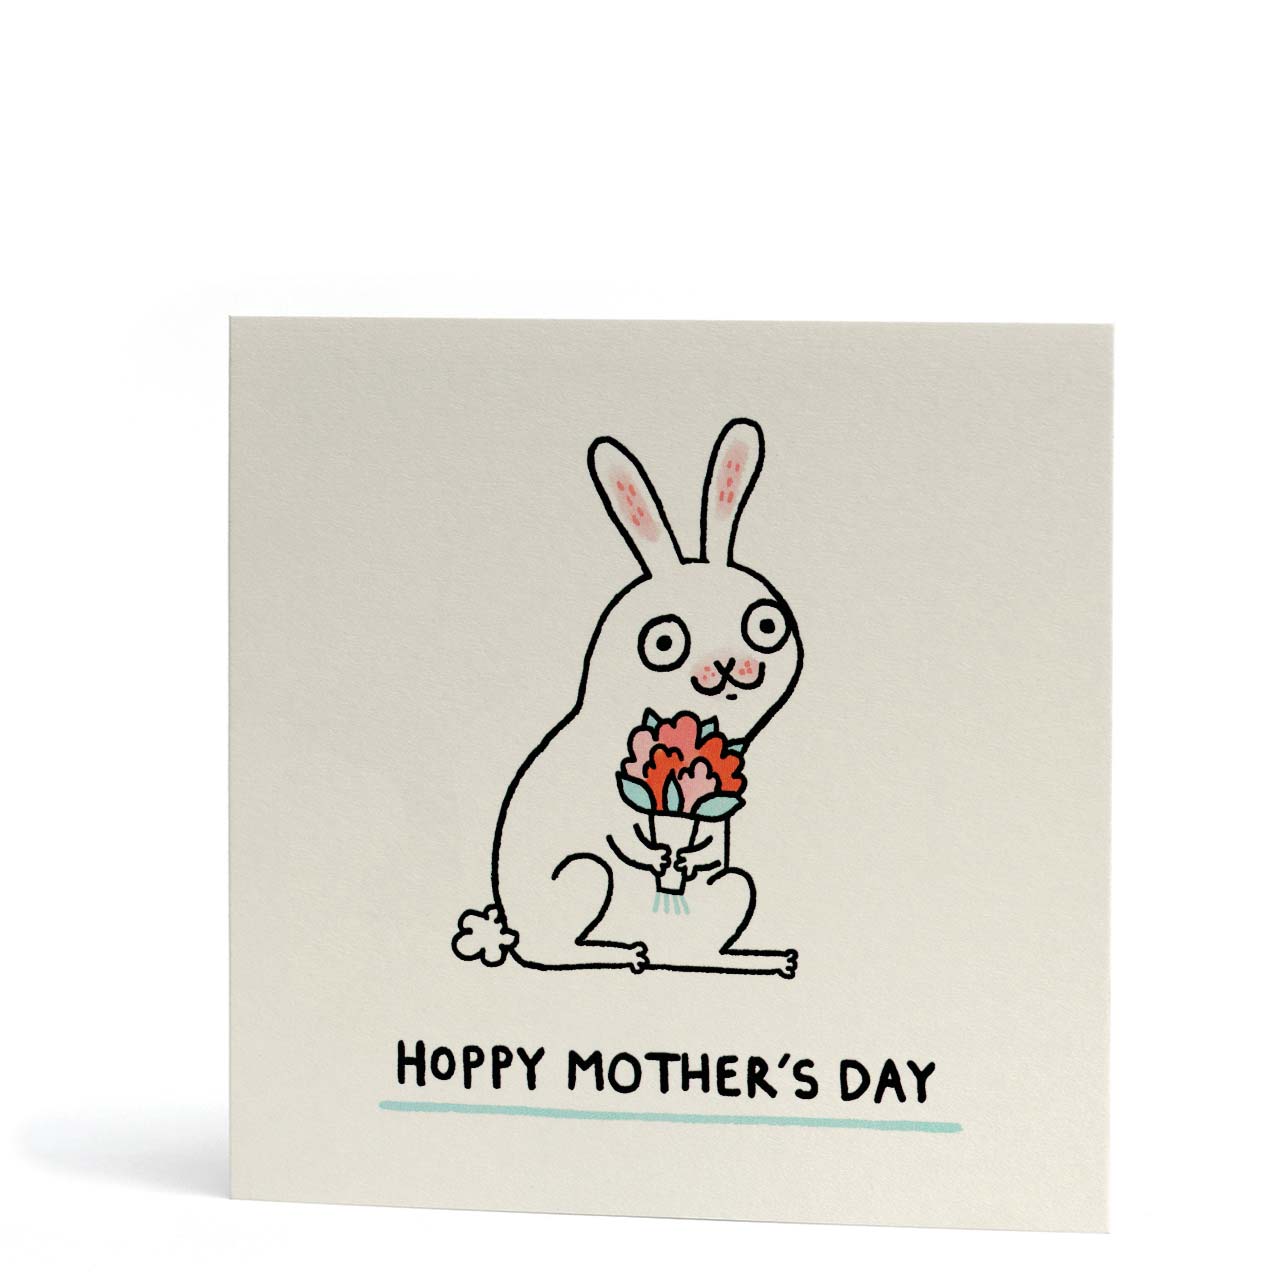 Hoppy Mother's Day Greeting Card